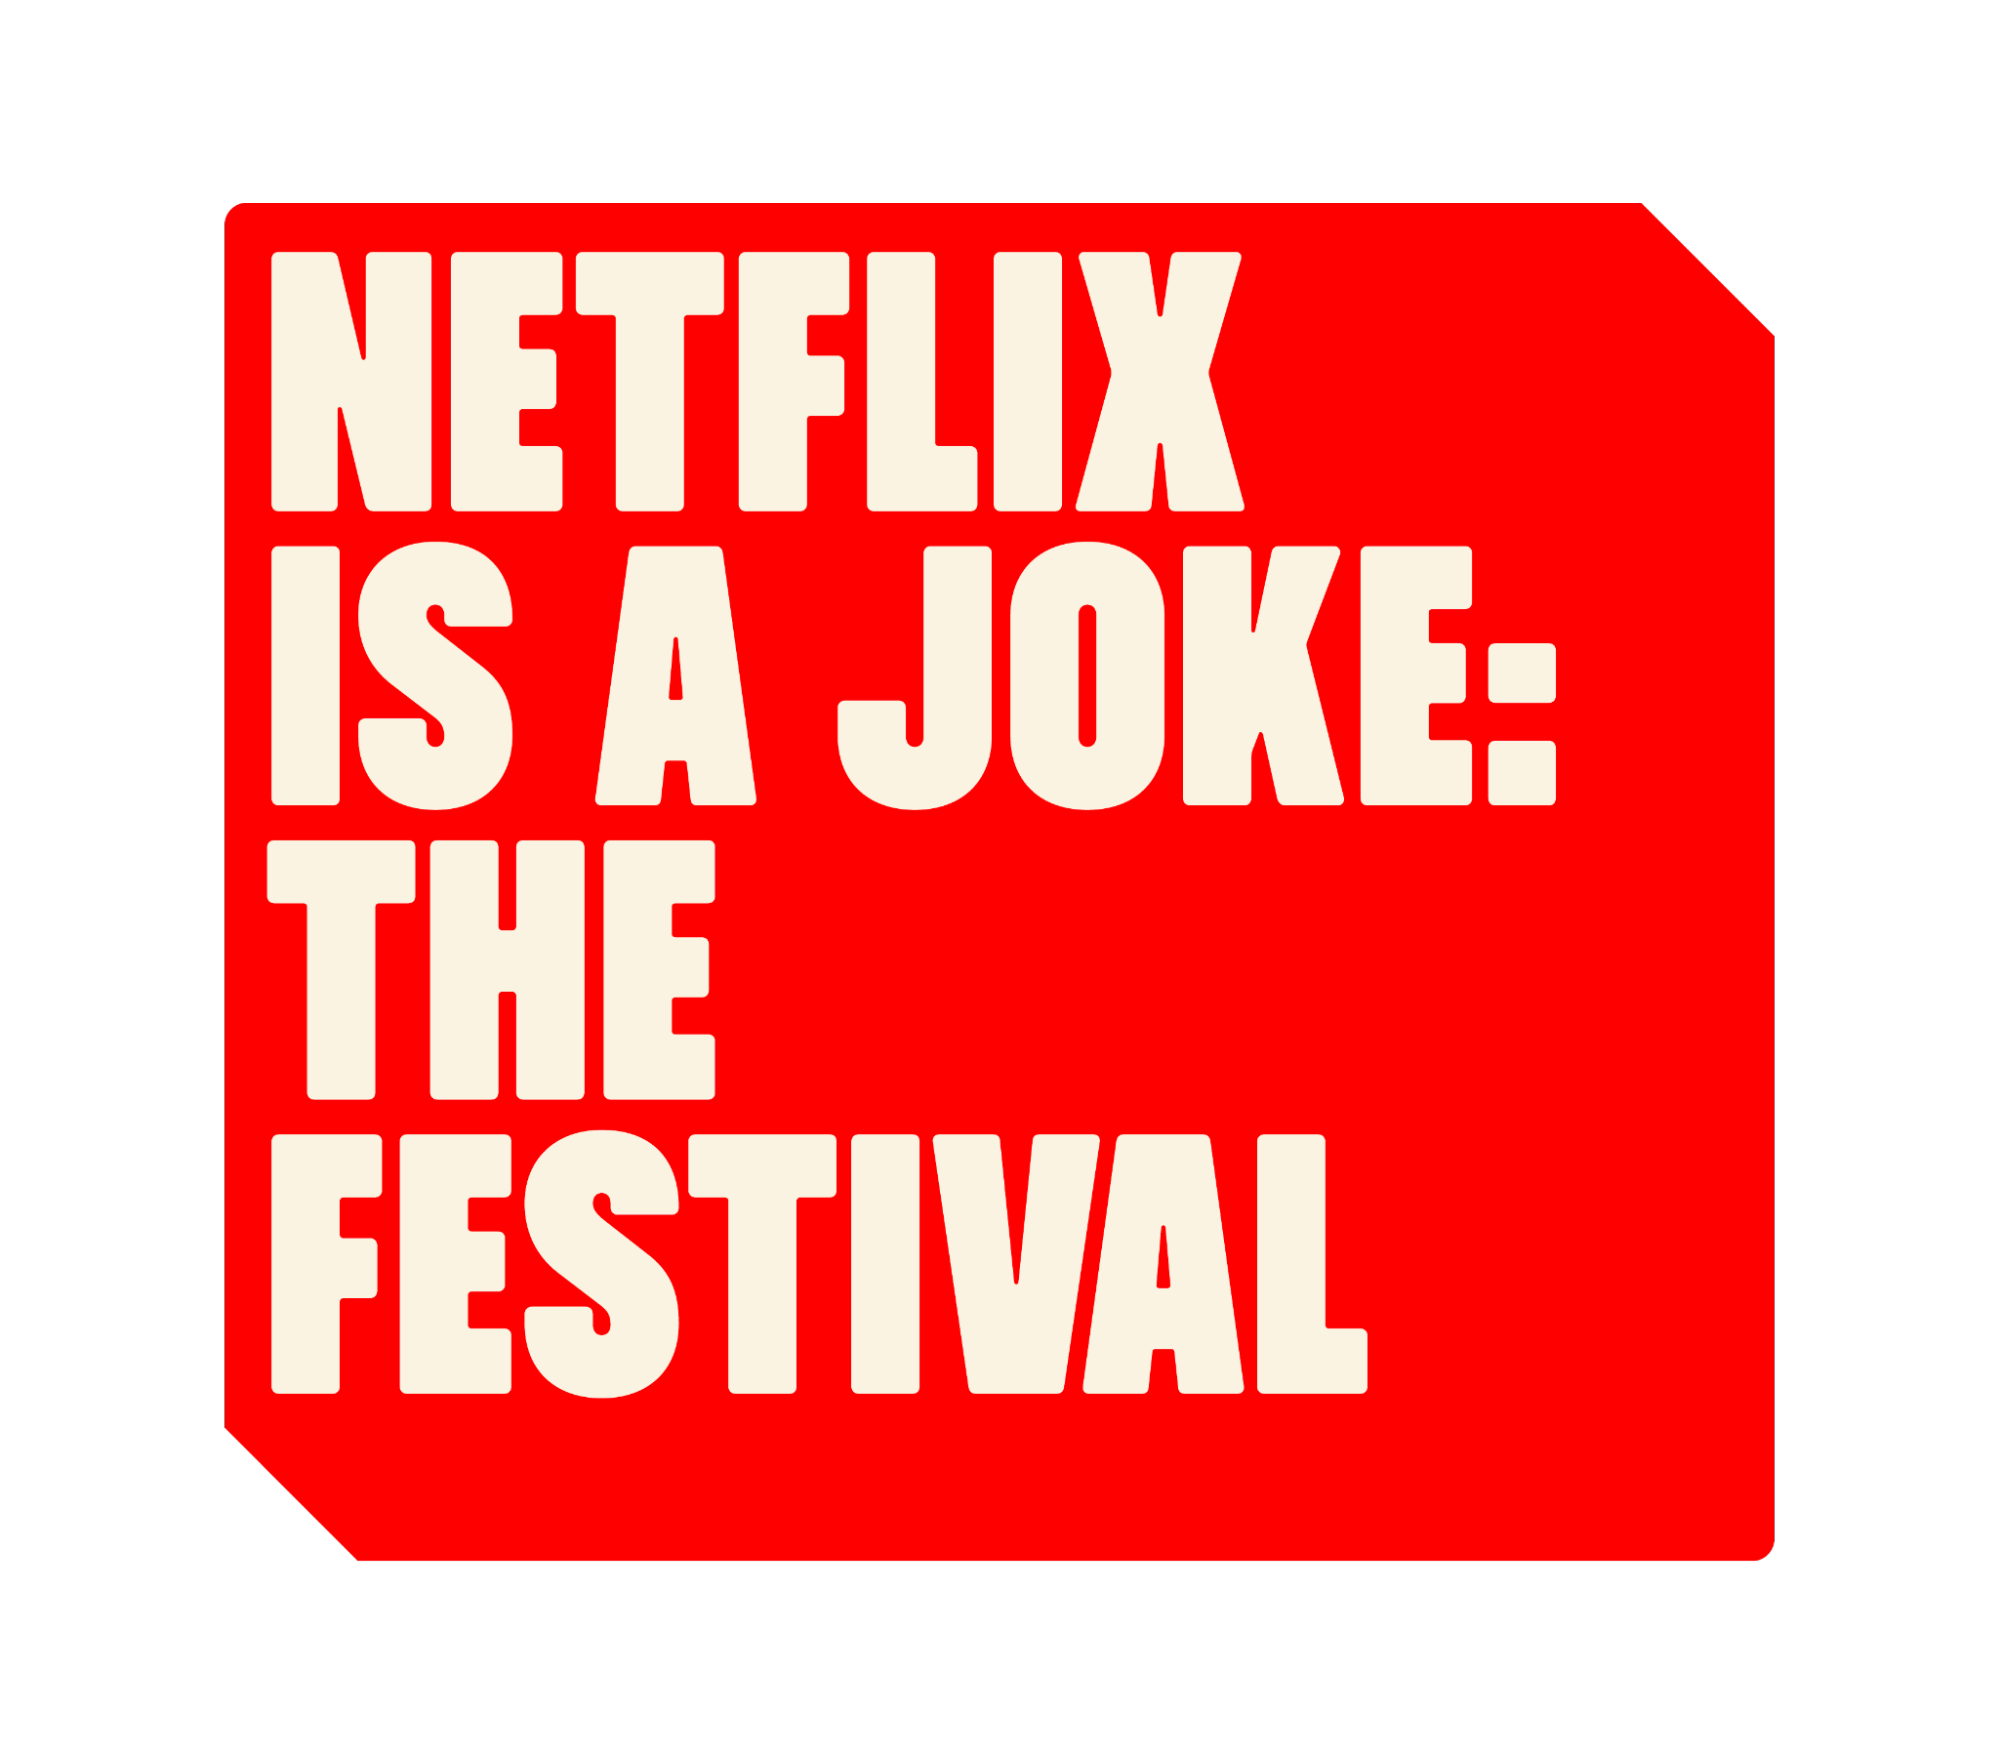 Netflix Is a Joke Announces 2022 Comedy Festival Featuring More Than 130 Artists Performing in Over 25 of La's Most Iconic Venues From Dodger Stadium to the Hollywood Bowl April 28th to May 8th